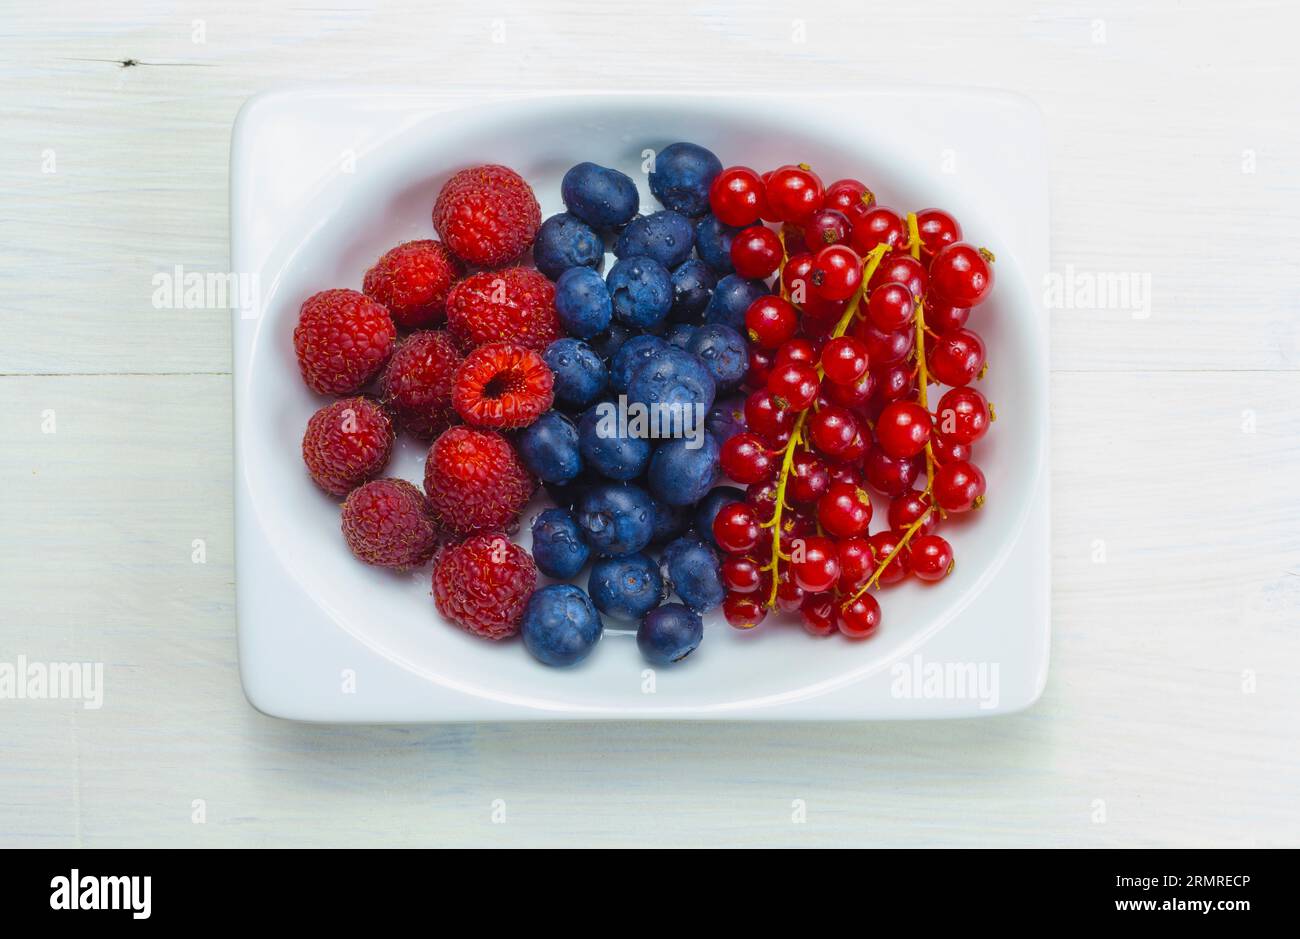 display of vibrant mixed berries, including raspberries, blueberries, and currants, adorns the rectangular container. Stock Photo